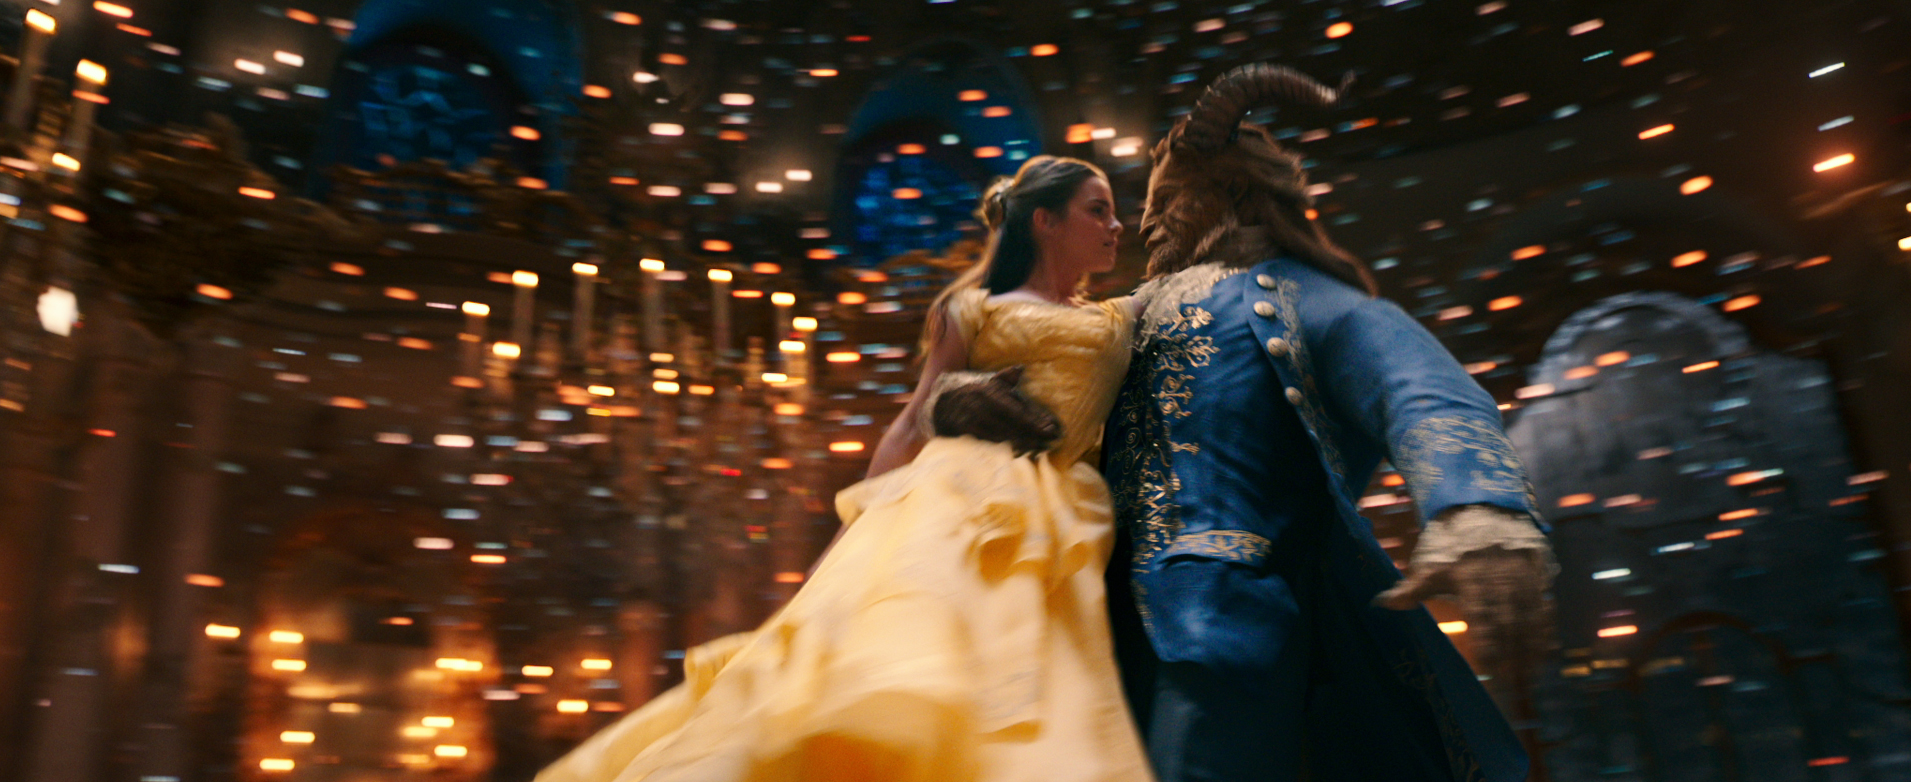 Beauty and the Beast Delivers Nostalgia With a Breath of Fresh Air (Spoiler Free)